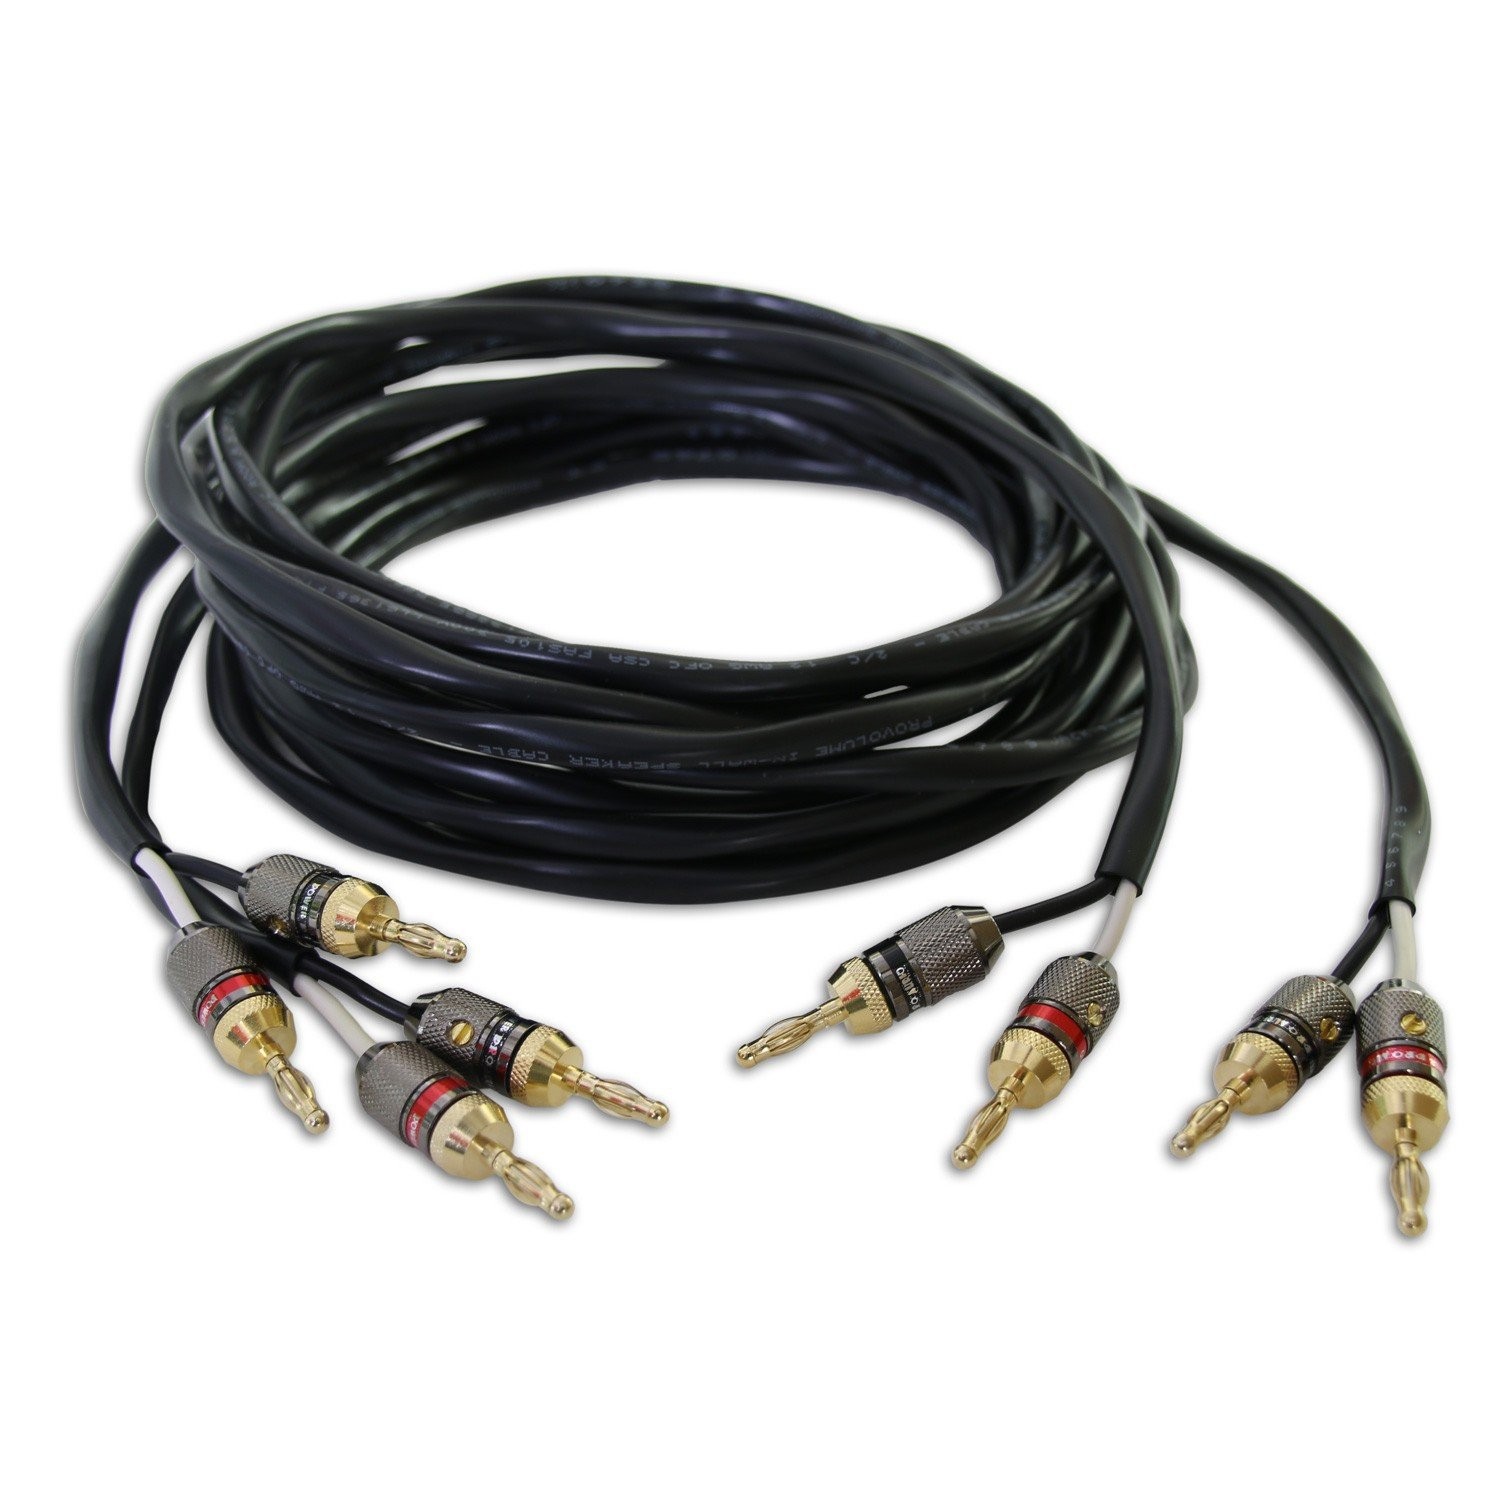 ThruSound HiFi-Series 12AWG 2-Conductor Speaker Wire with Premium 24k Gold-Plated Banana Plugs (50 Feet/Pair)